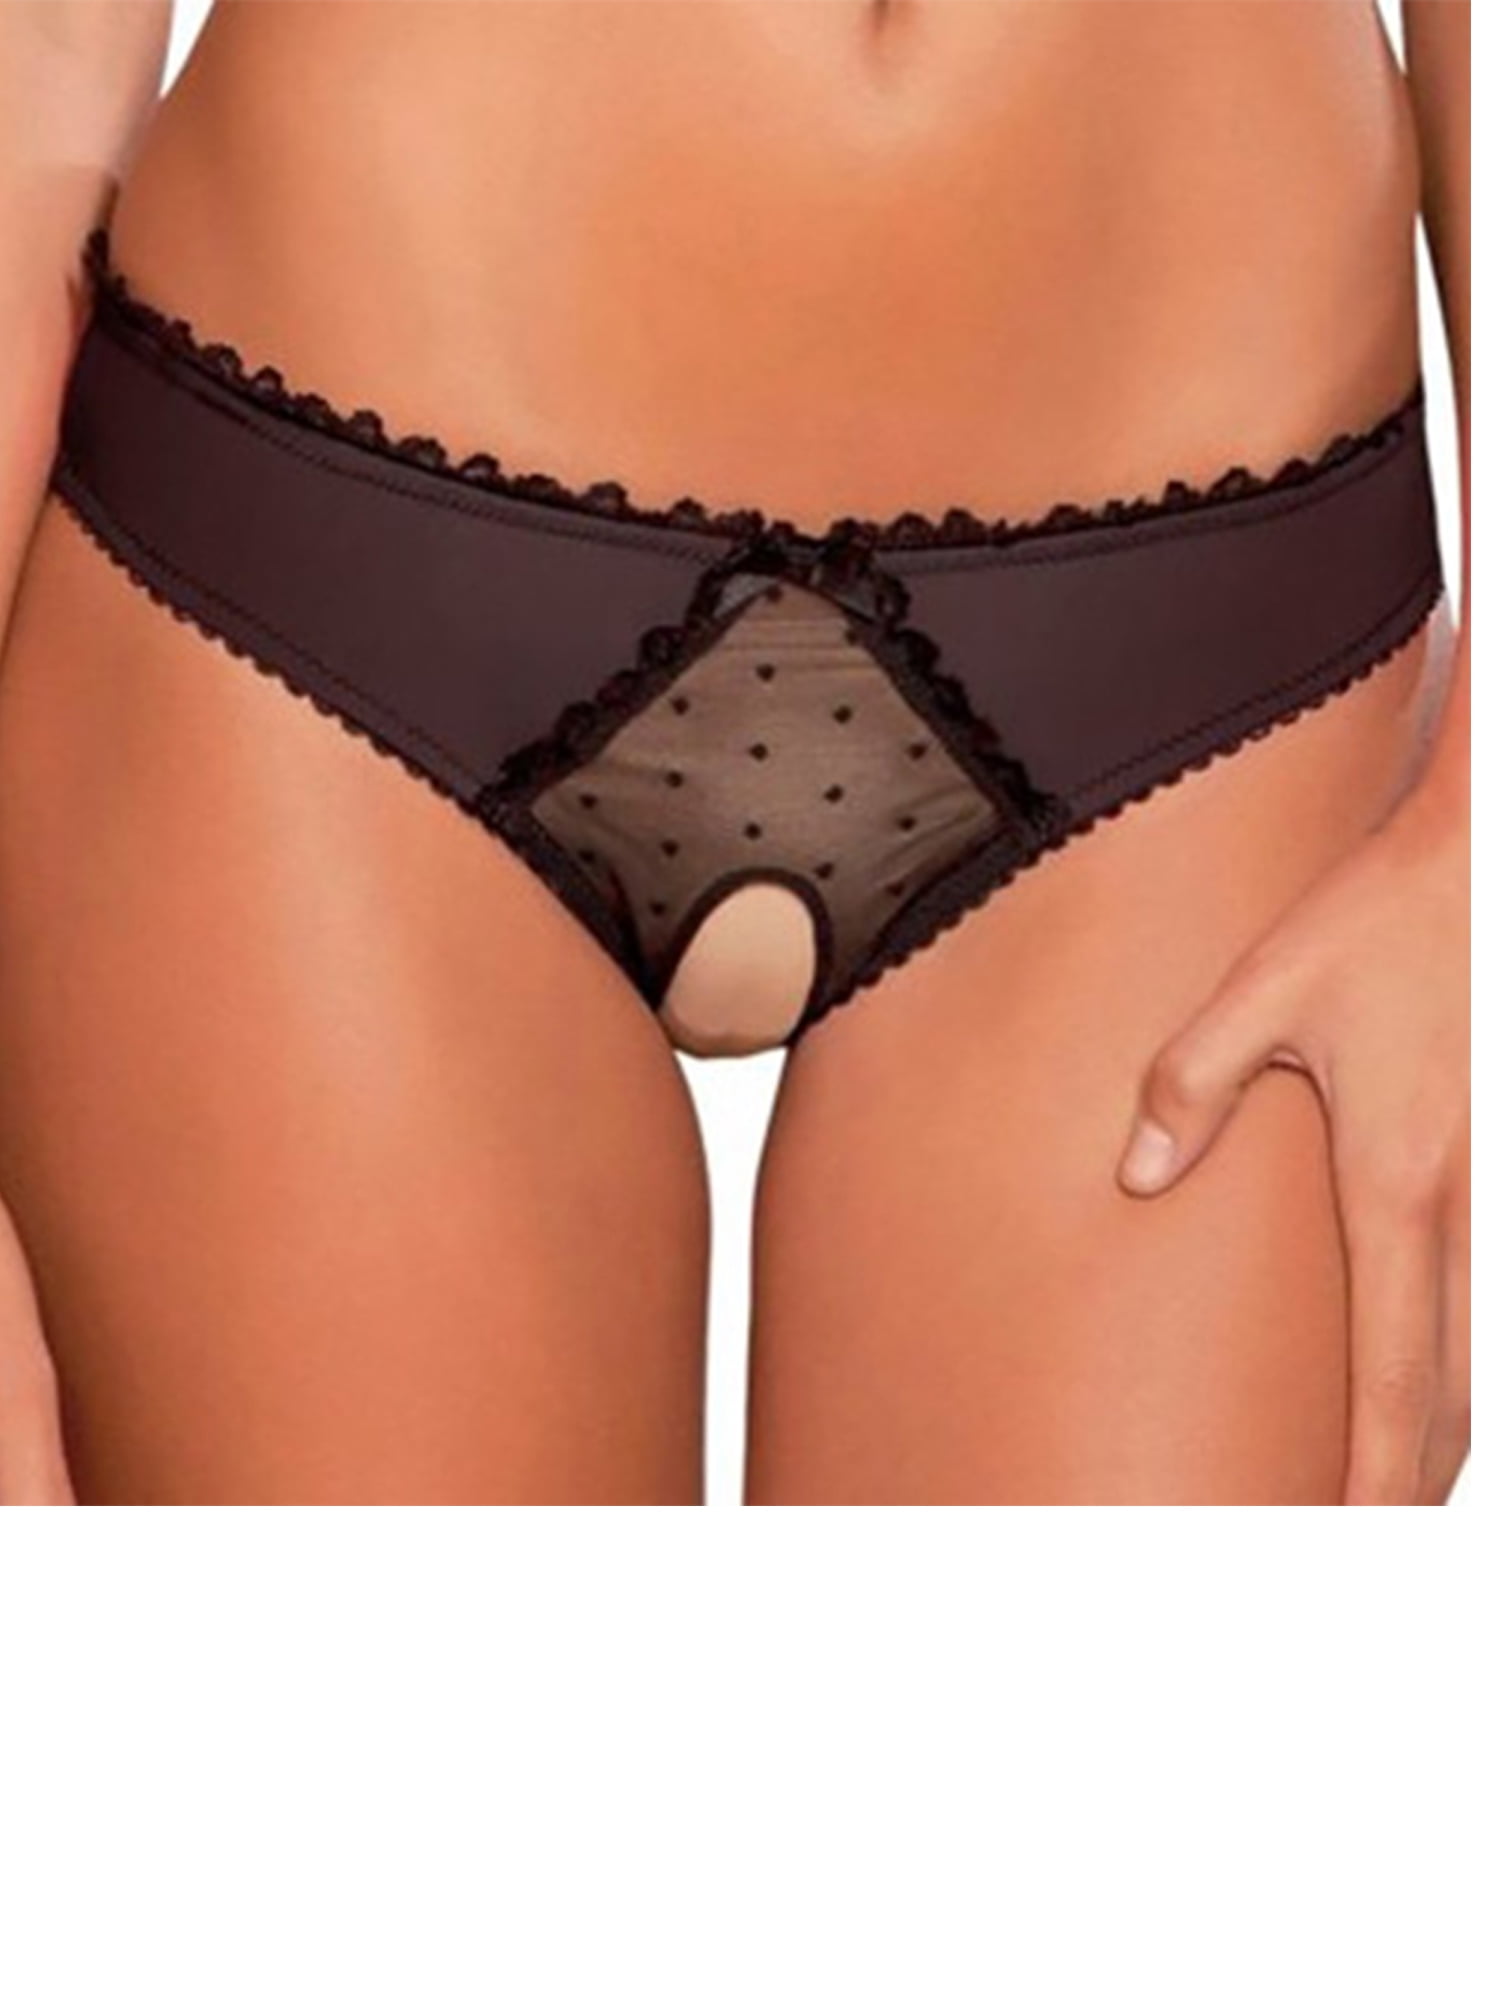 crotchless g string panties